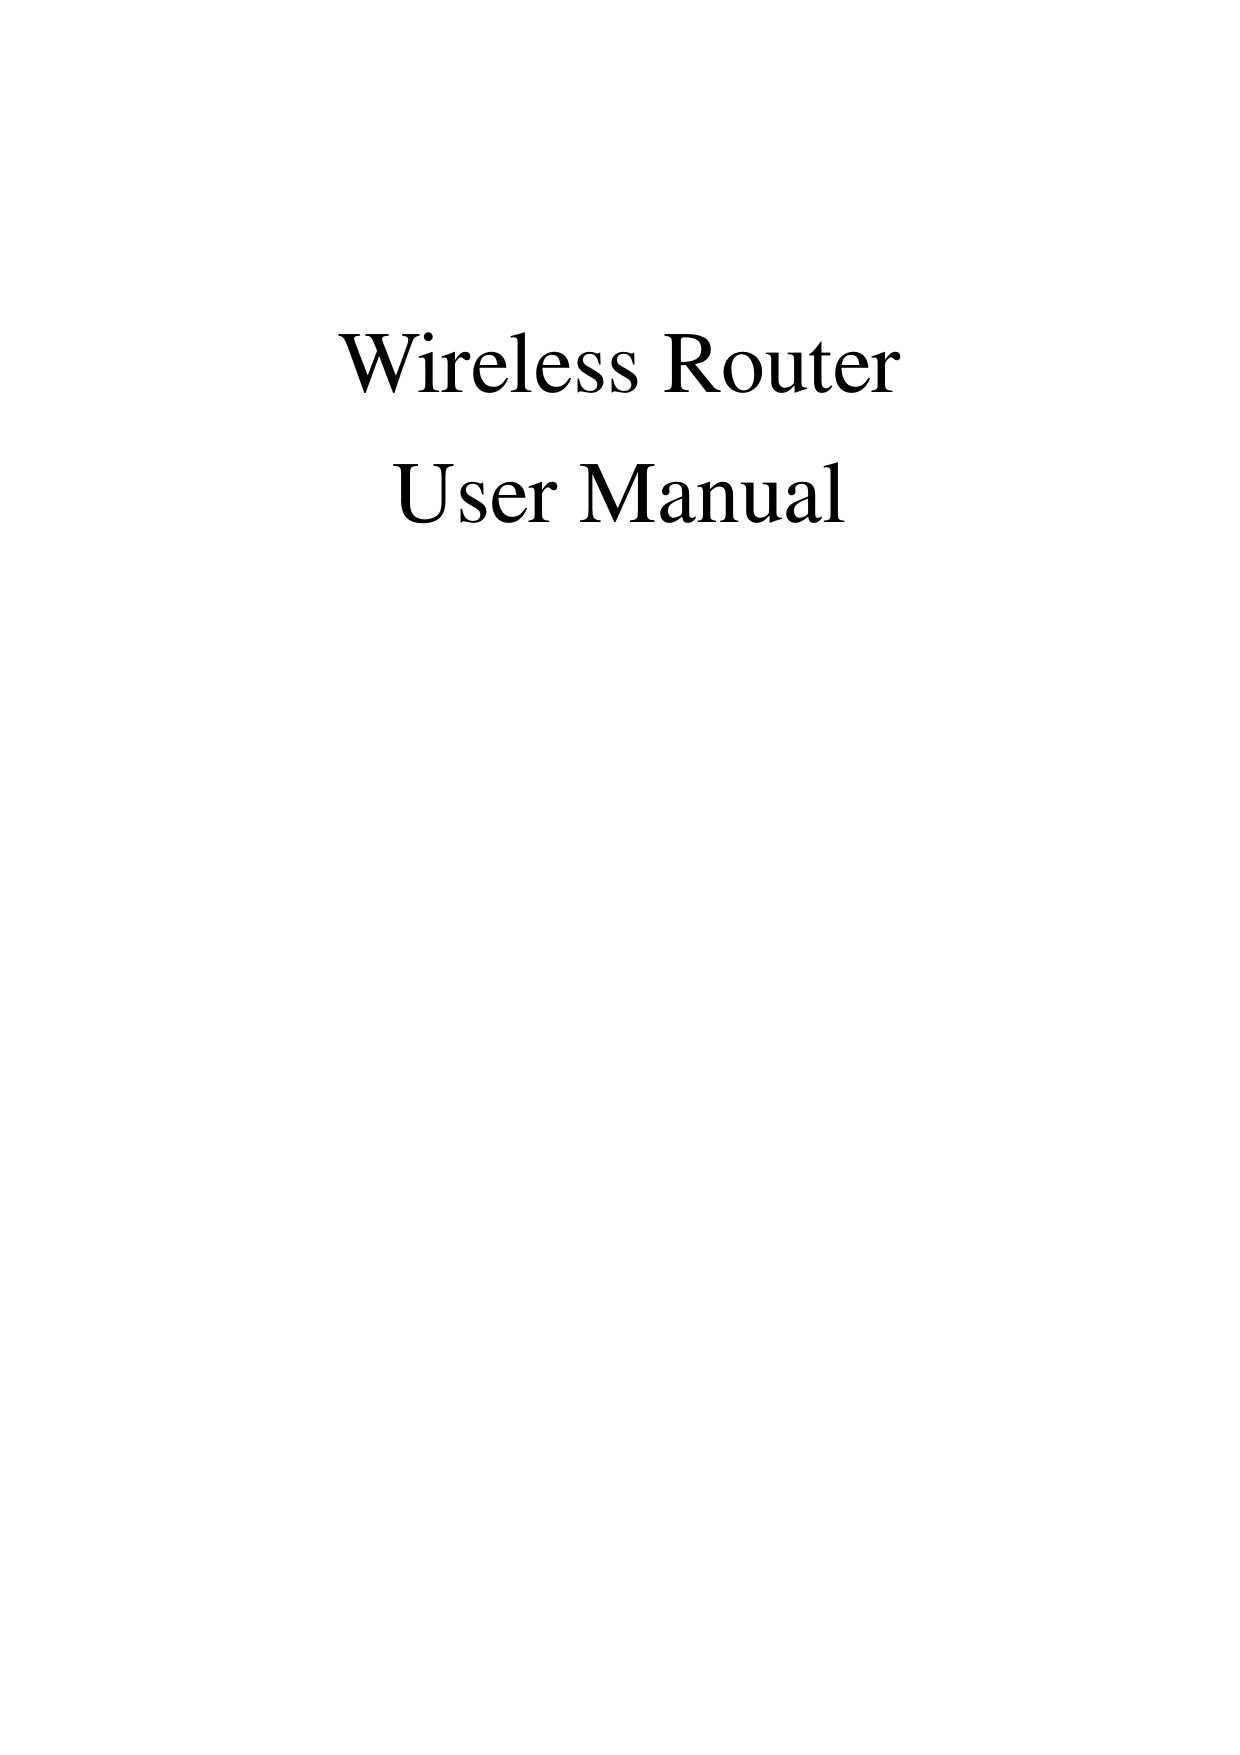    Wireless Router User Manual   